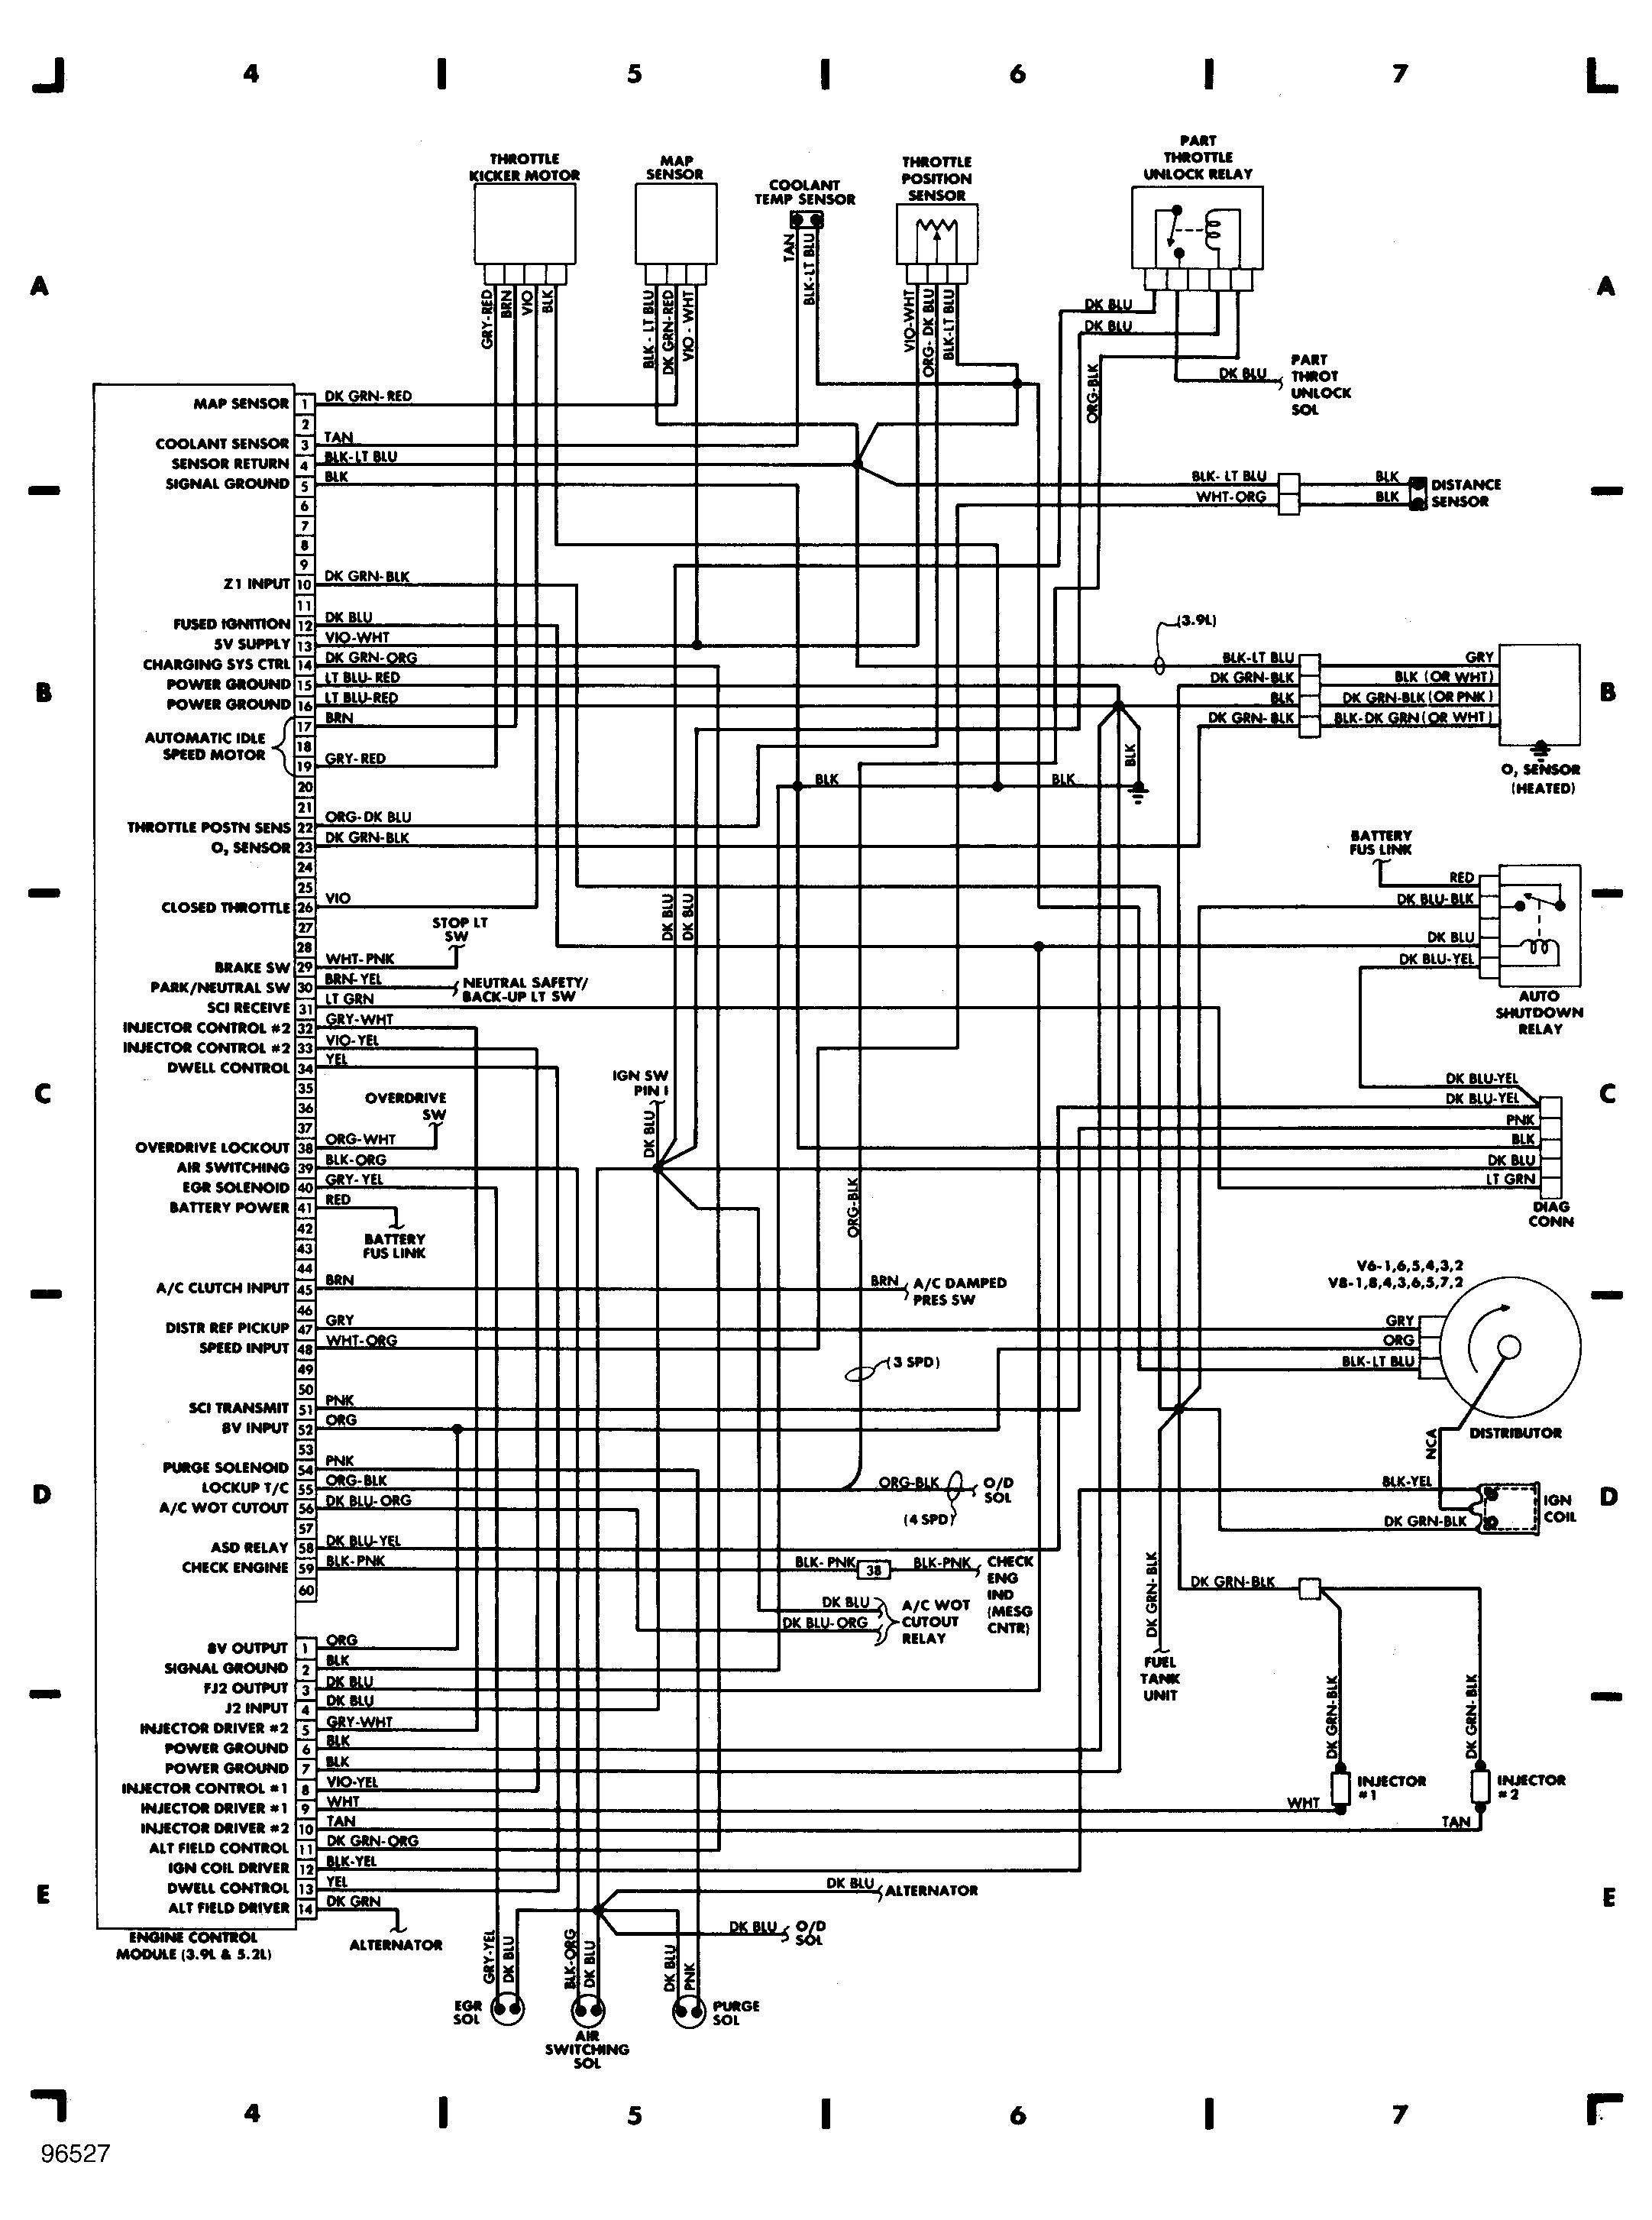 1981 Chevy Truck Fuse Box Diagram 1981 Dodge D150 Wiring Diagram Another Blog About Wiring Diagram • Of 1981 Chevy Truck Fuse Box Diagram